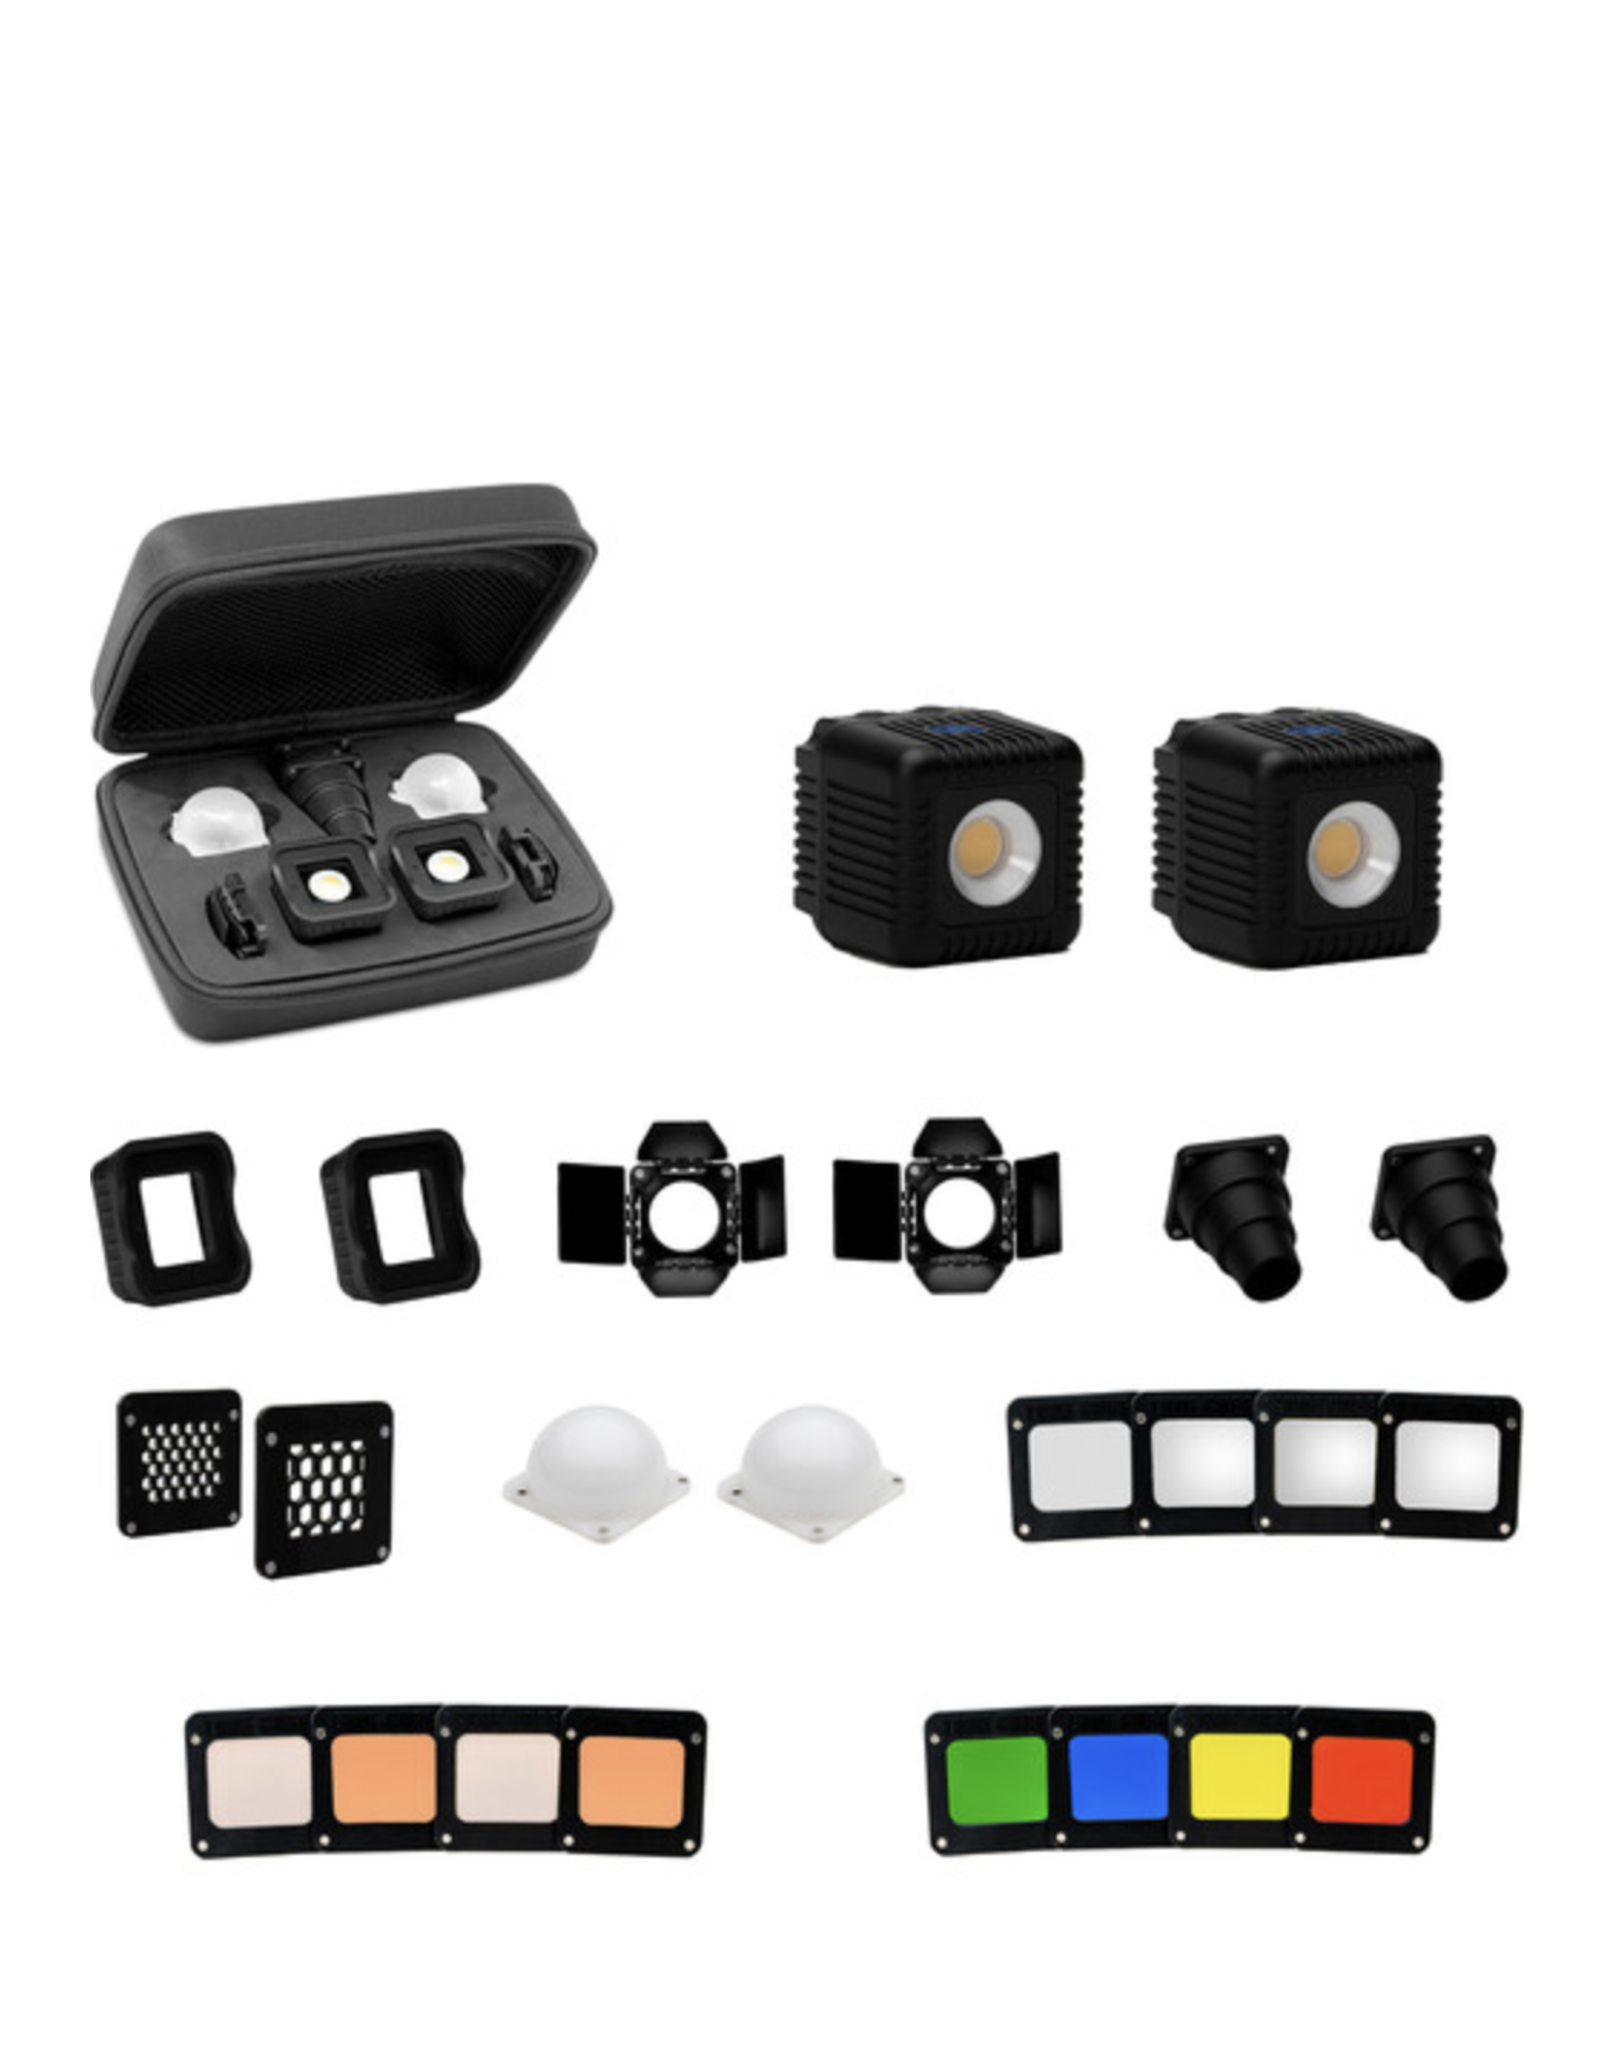 Lume Cube Lume Cube 2.0 Professional 22-Piece LED Lighting Kit for Camera Video & Photography (Used)